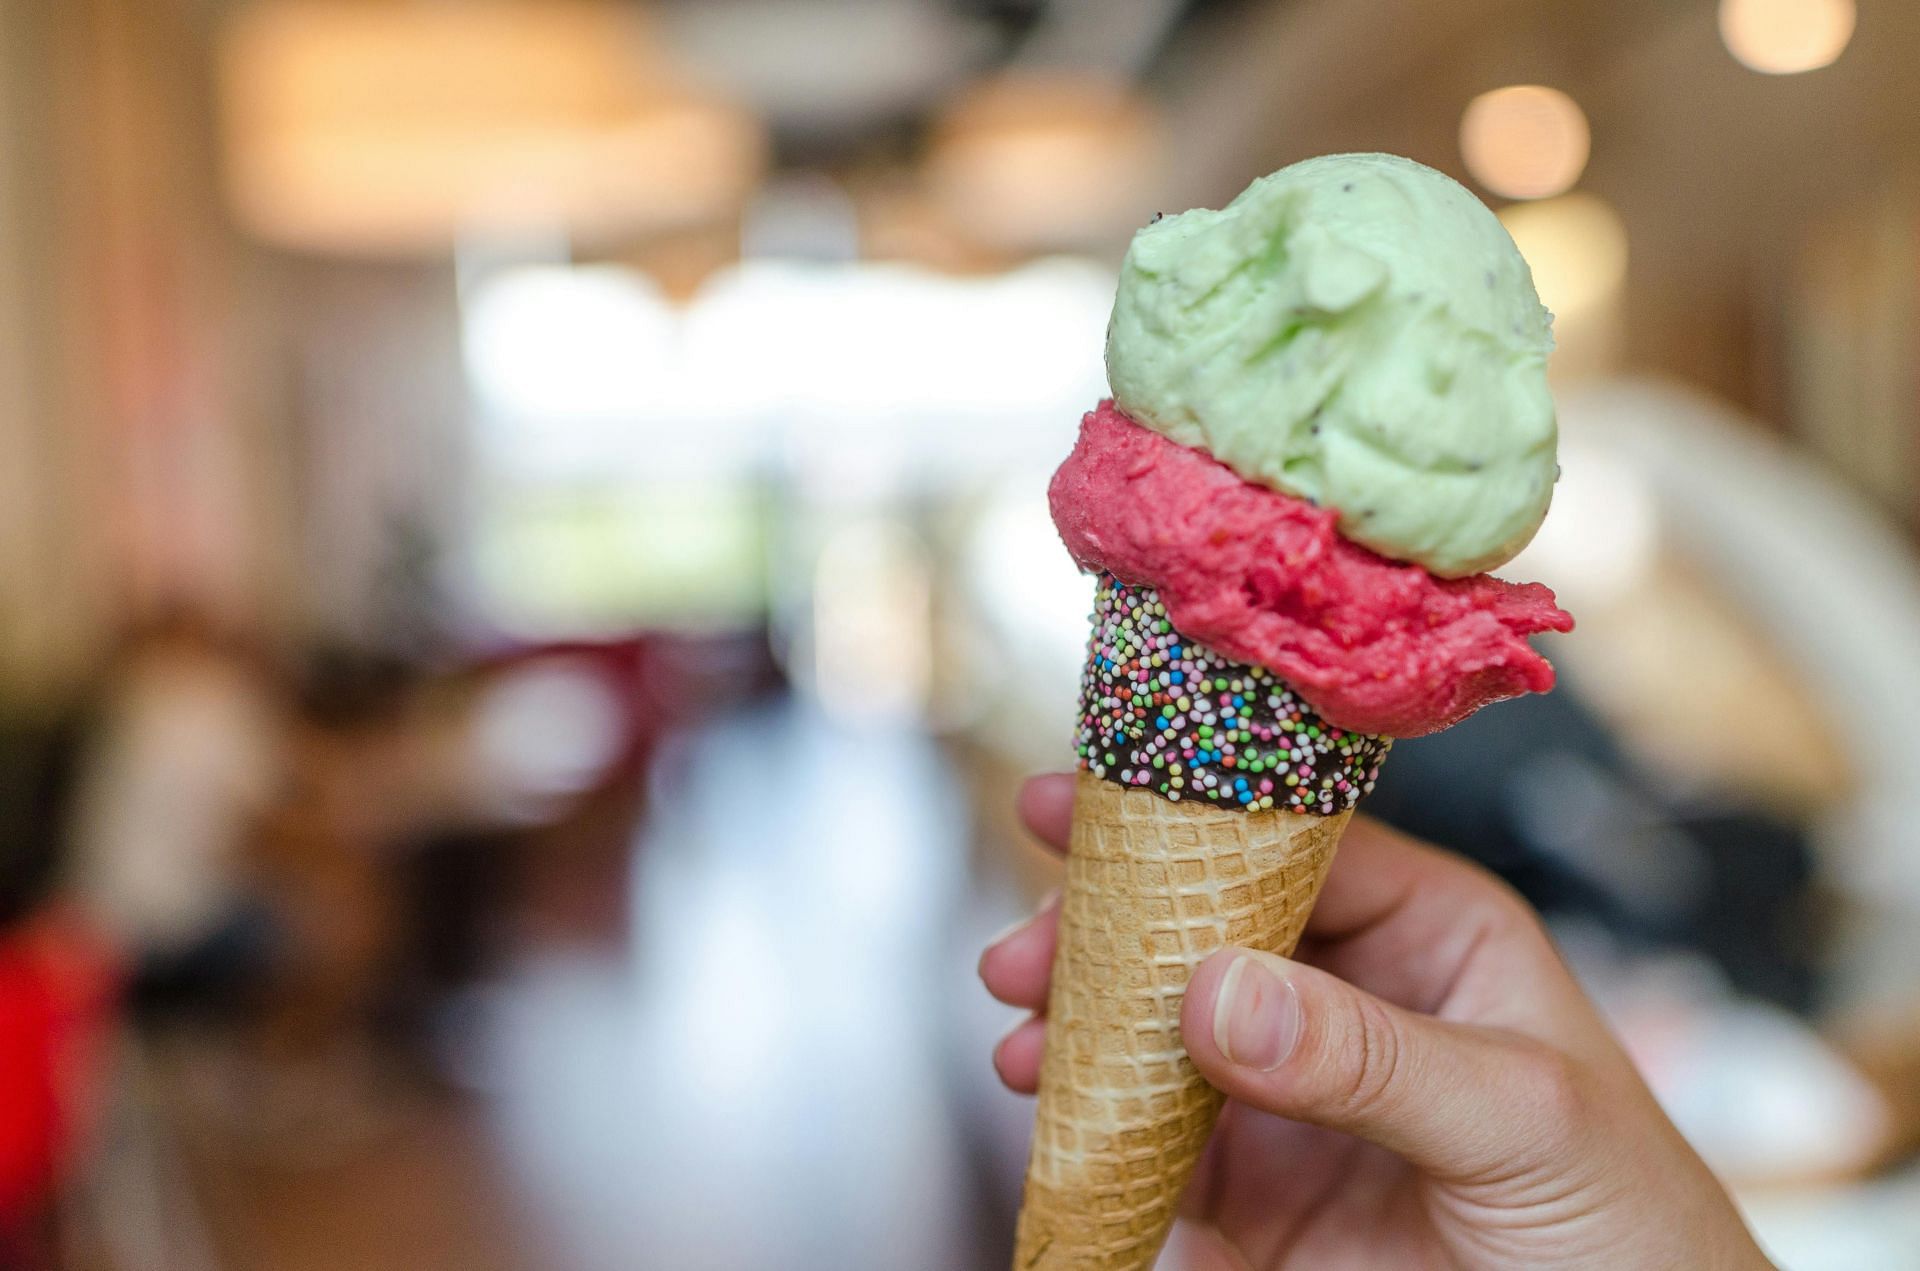 ice cream for sore throat (image sourced via Pexels / Photo by lukas)